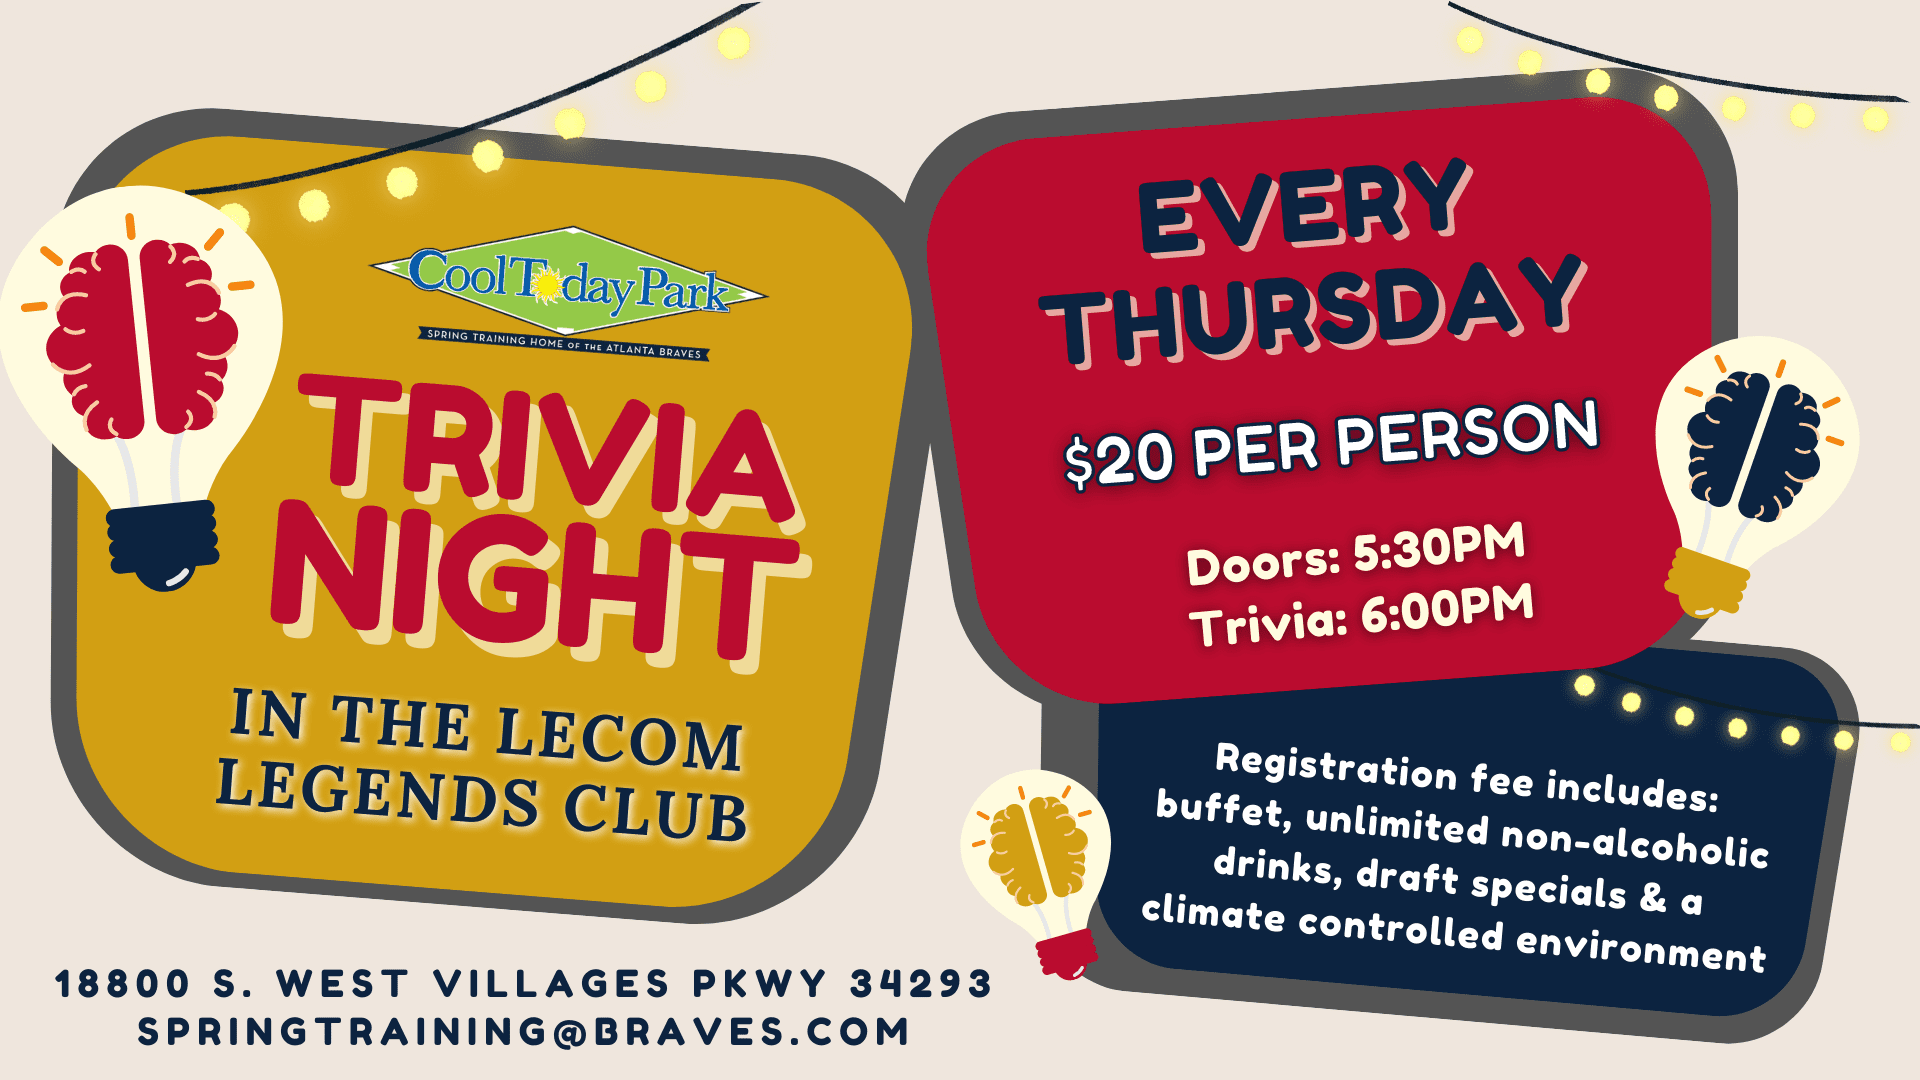 Trivia Night at CoolToday Park in the LECOM Legends Club every Thursday